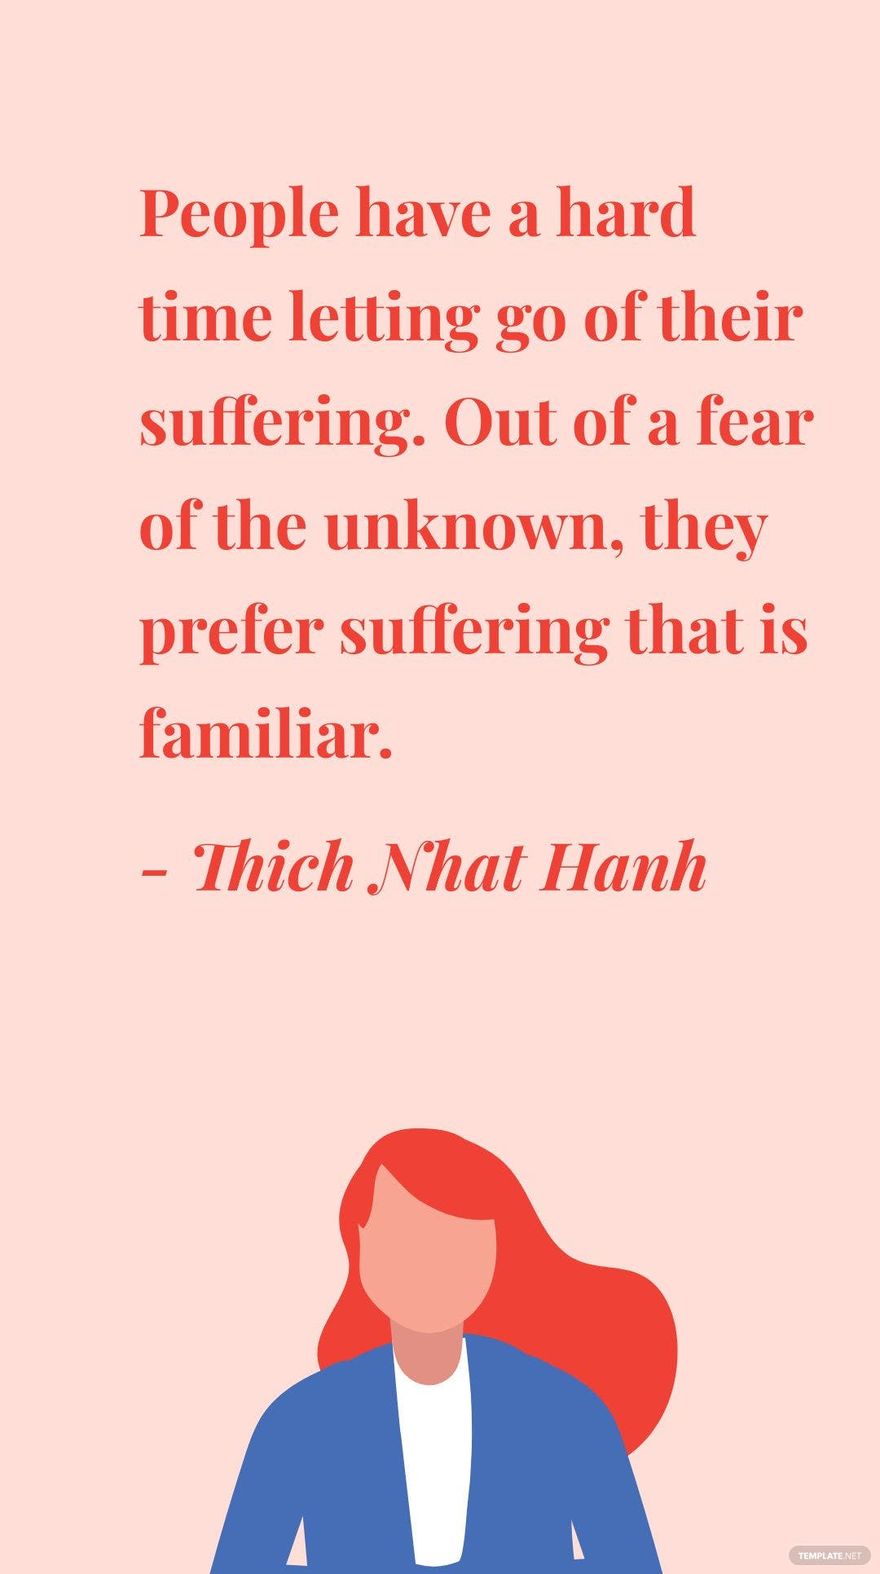 Thich Nhat Hanh - People have a hard time letting go of their suffering. Out of a fear of the unknown, they prefer suffering that is familiar.